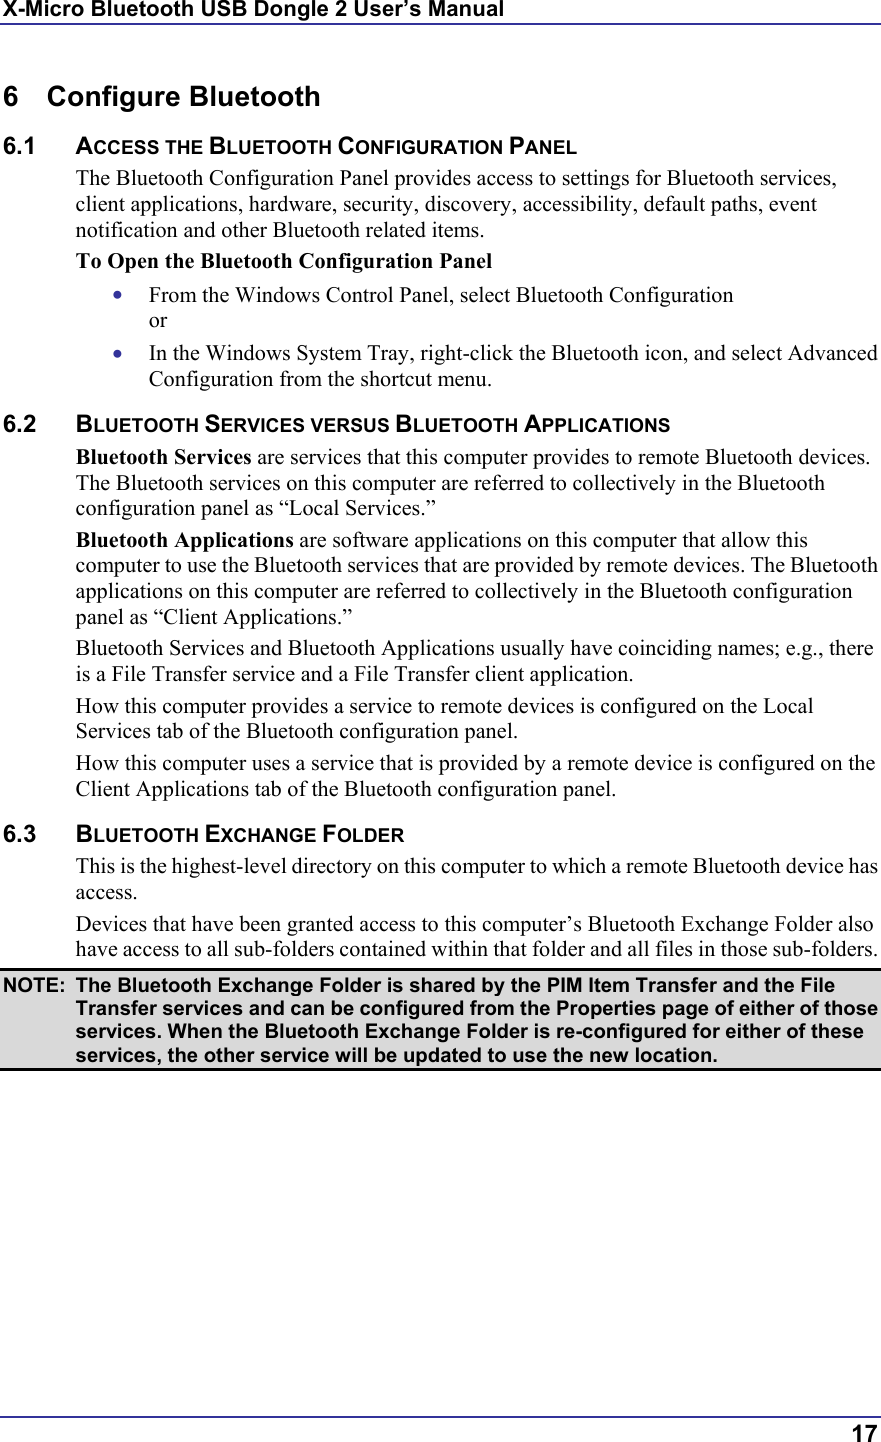 X-Micro Bluetooth USB Dongle 2 User’s Manual  17 6 Configure Bluetooth 6.1 ACCESS THE BLUETOOTH CONFIGURATION PANEL The Bluetooth Configuration Panel provides access to settings for Bluetooth services, client applications, hardware, security, discovery, accessibility, default paths, event notification and other Bluetooth related items. To Open the Bluetooth Configuration Panel •  From the Windows Control Panel, select Bluetooth Configuration or •  In the Windows System Tray, right-click the Bluetooth icon, and select Advanced Configuration from the shortcut menu. 6.2 BLUETOOTH SERVICES VERSUS BLUETOOTH APPLICATIONS Bluetooth Services are services that this computer provides to remote Bluetooth devices. The Bluetooth services on this computer are referred to collectively in the Bluetooth configuration panel as “Local Services.” Bluetooth Applications are software applications on this computer that allow this computer to use the Bluetooth services that are provided by remote devices. The Bluetooth applications on this computer are referred to collectively in the Bluetooth configuration panel as “Client Applications.” Bluetooth Services and Bluetooth Applications usually have coinciding names; e.g., there is a File Transfer service and a File Transfer client application. How this computer provides a service to remote devices is configured on the Local Services tab of the Bluetooth configuration panel. How this computer uses a service that is provided by a remote device is configured on the Client Applications tab of the Bluetooth configuration panel. 6.3 BLUETOOTH EXCHANGE FOLDER This is the highest-level directory on this computer to which a remote Bluetooth device has access. Devices that have been granted access to this computer’s Bluetooth Exchange Folder also have access to all sub-folders contained within that folder and all files in those sub-folders. NOTE:  The Bluetooth Exchange Folder is shared by the PIM Item Transfer and the File Transfer services and can be configured from the Properties page of either of those services. When the Bluetooth Exchange Folder is re-configured for either of these services, the other service will be updated to use the new location. 